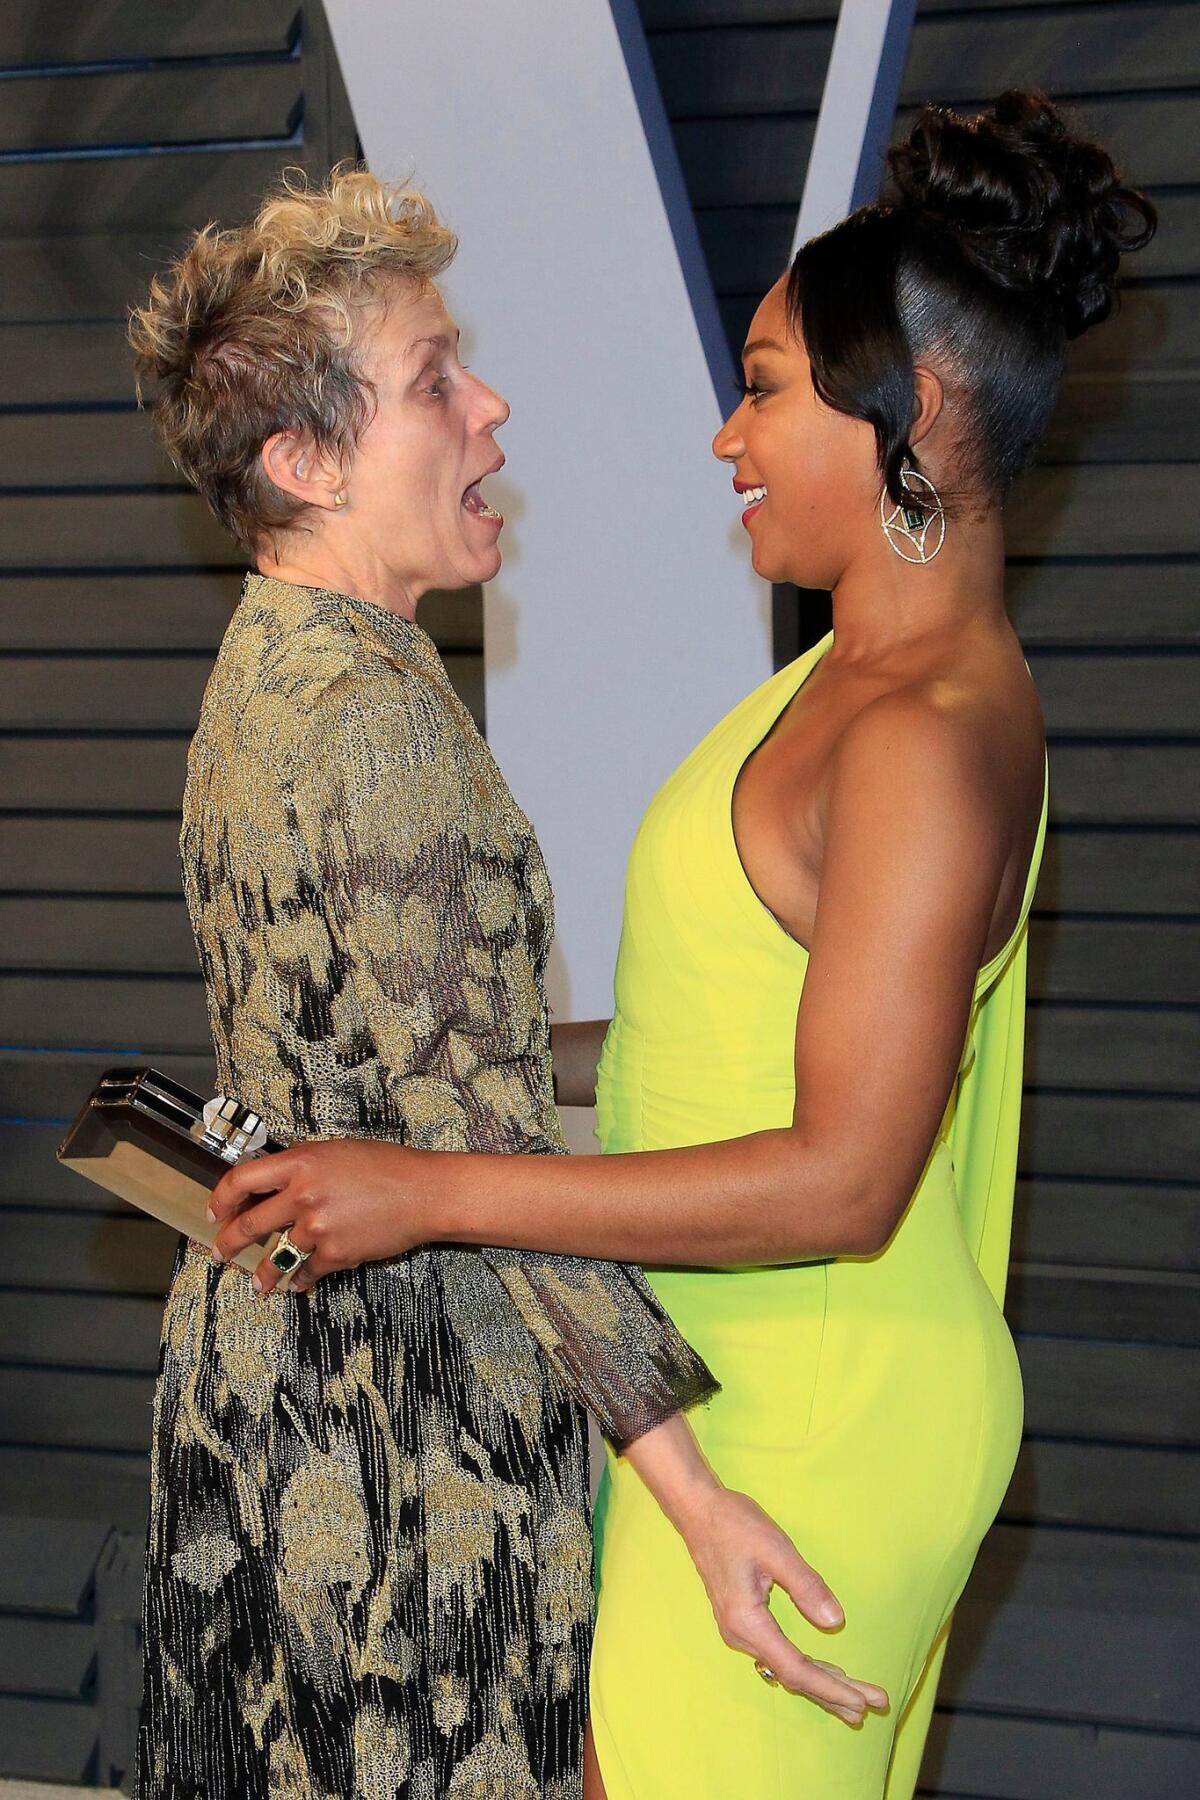 Frances McDormand tells Tiffany Haddish all about the theft of her Oscar at the entrance to the Vanity Fair Oscar party after the 90th Academy Awards.